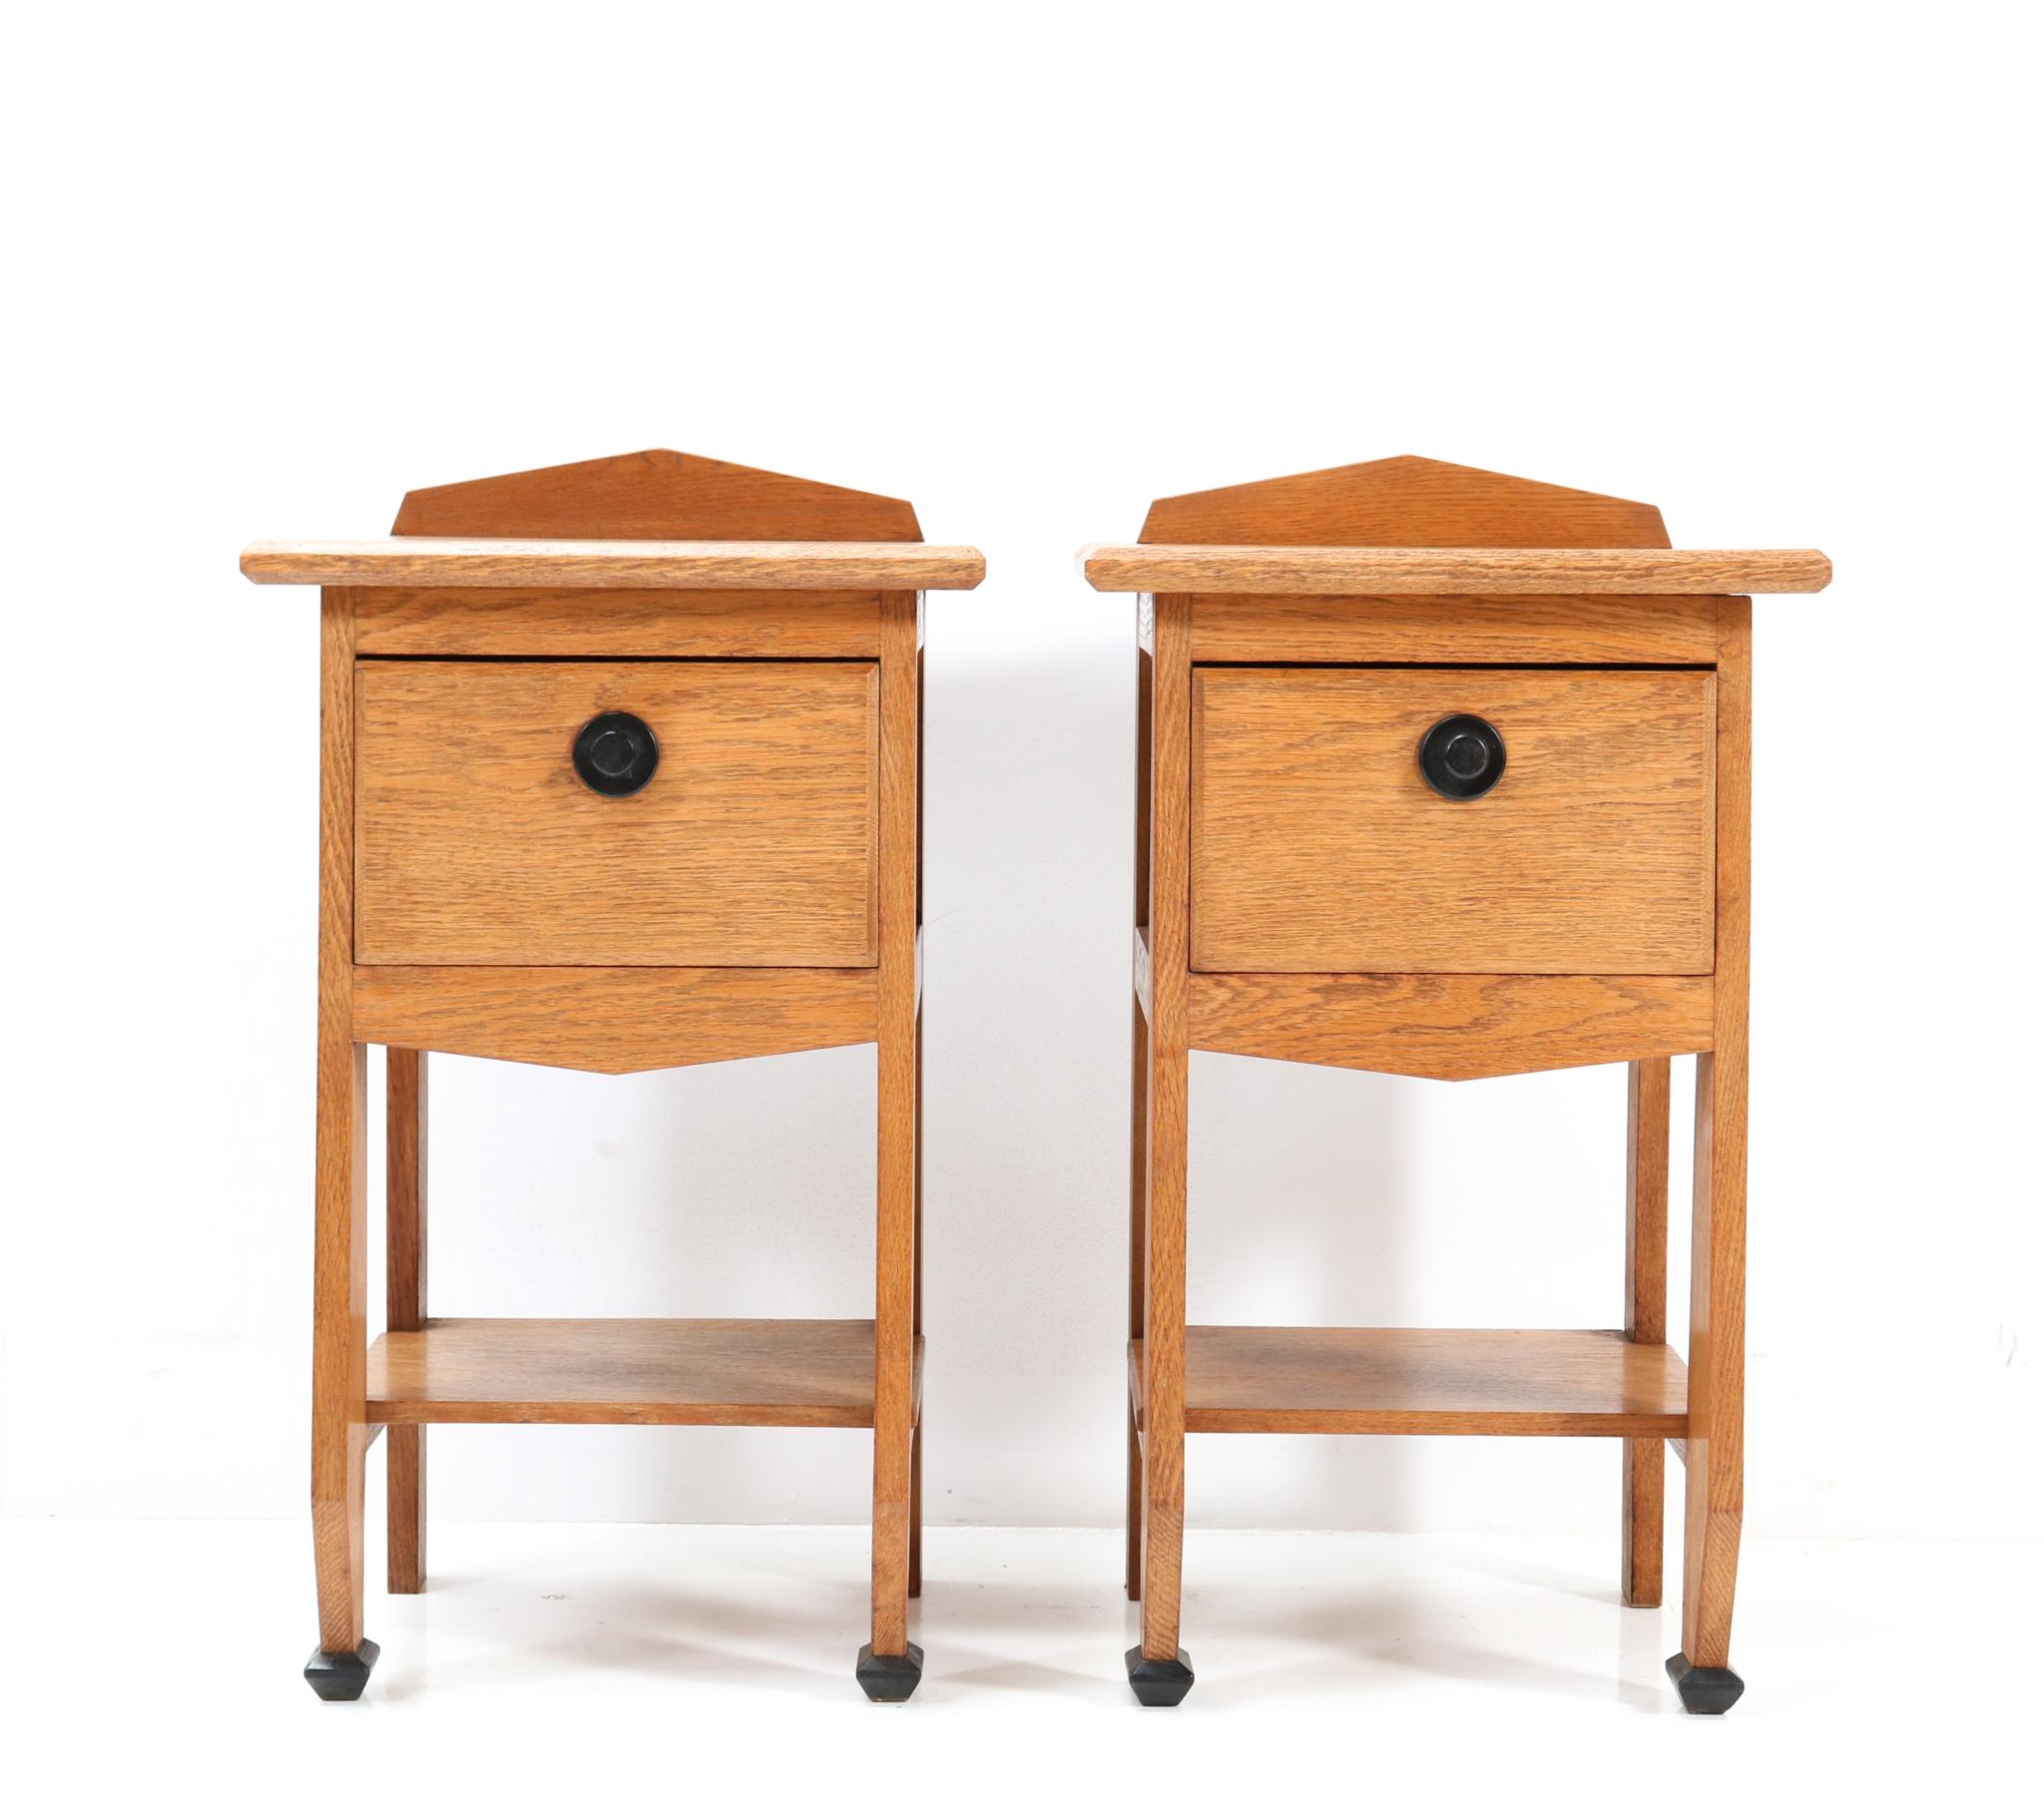 Magnificent and ultra rare pair of Art Deco Amsterdamse School nightstands.
The design is attributed to Jac. van den Bosch.
Striking Dutch design from the 1920s.
Solid oak frames and the drawers have the original ebony knobs.
Original black